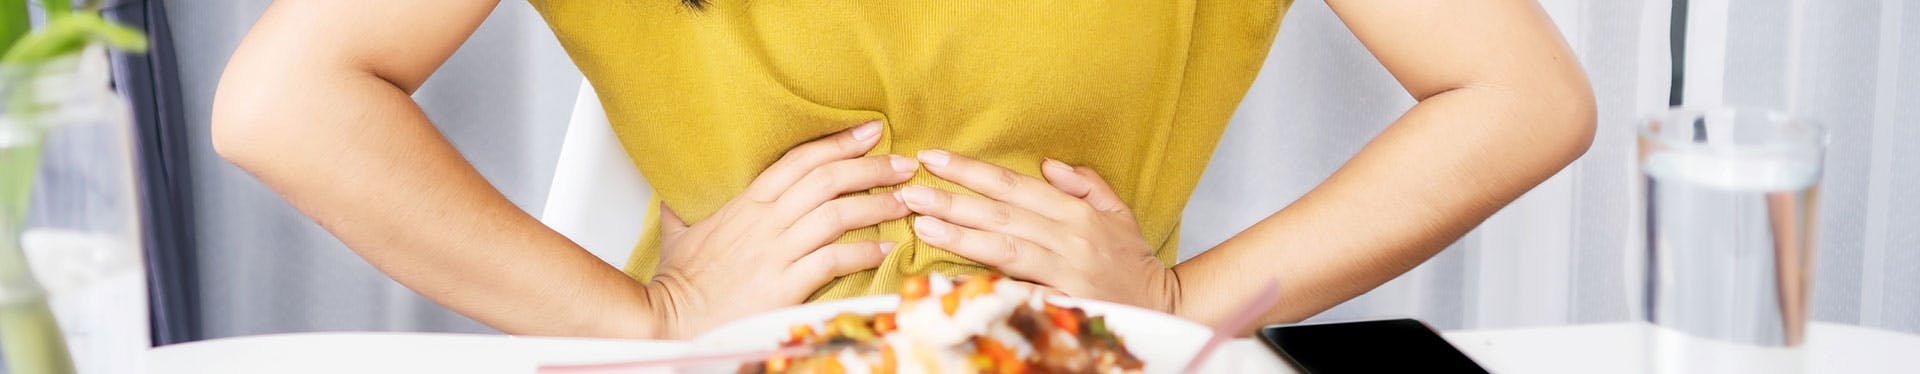 Woman with indigestion after eating food